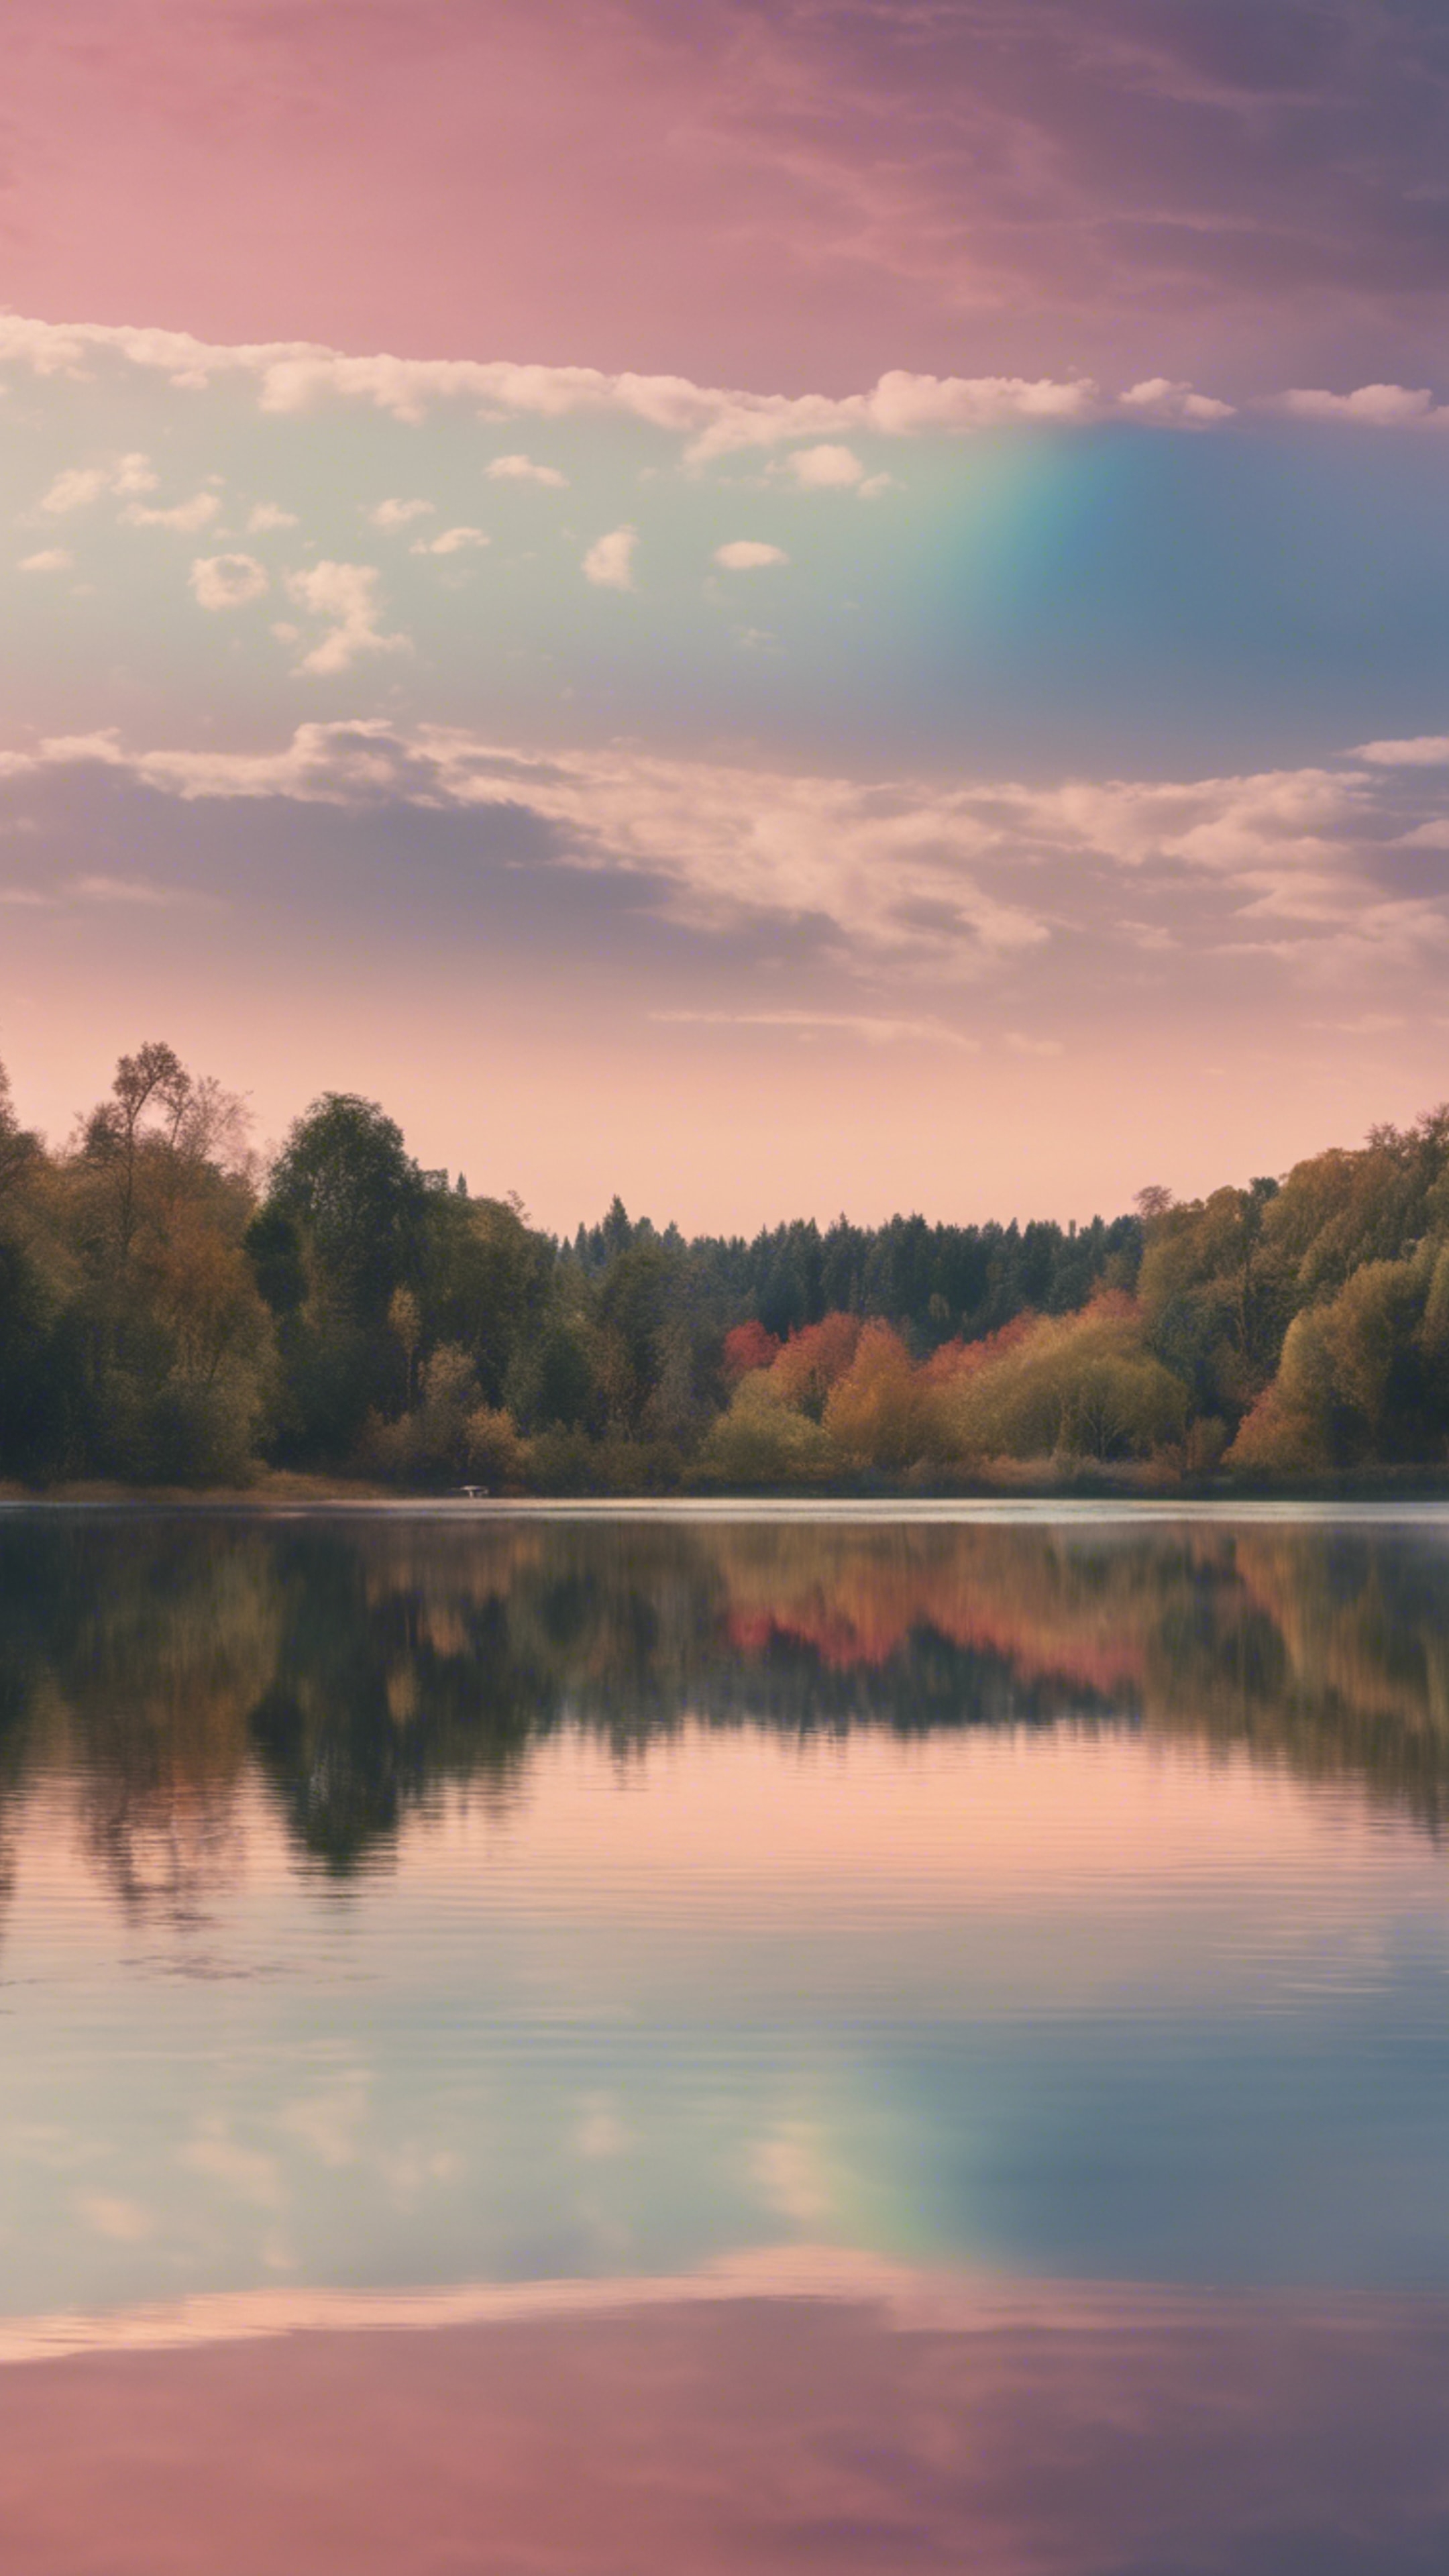 A serene landscape at dusk with a tranquil lake reflecting a pastel rainbow. Wallpaper[4f39dad1dad74a18ae9a]